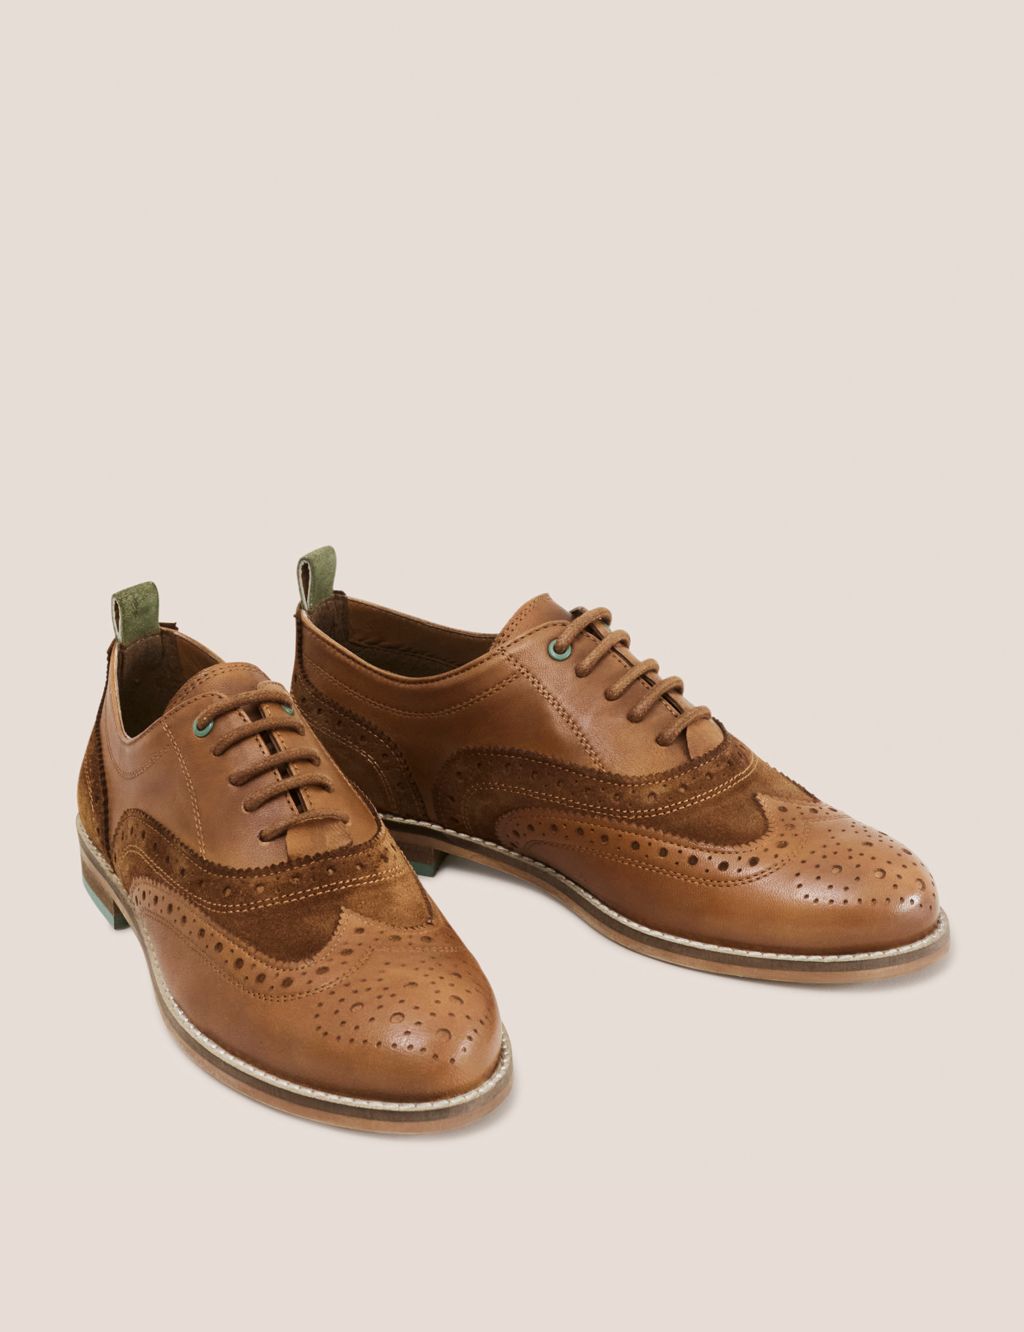 Leather Lace Up Flat Brogues image 2